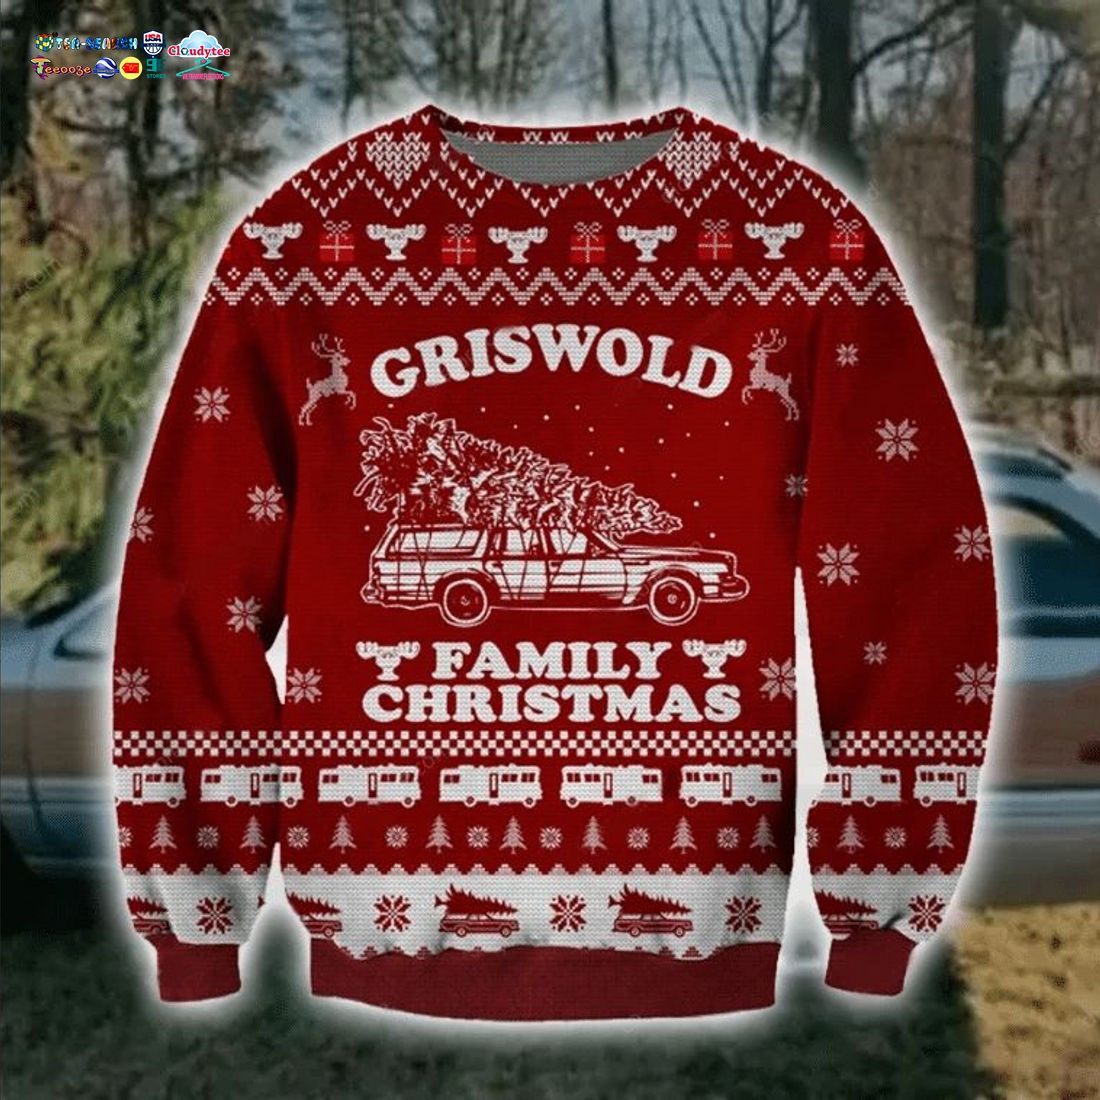 Griswold Family Christmas Ugly Christmas Sweater - Natural and awesome